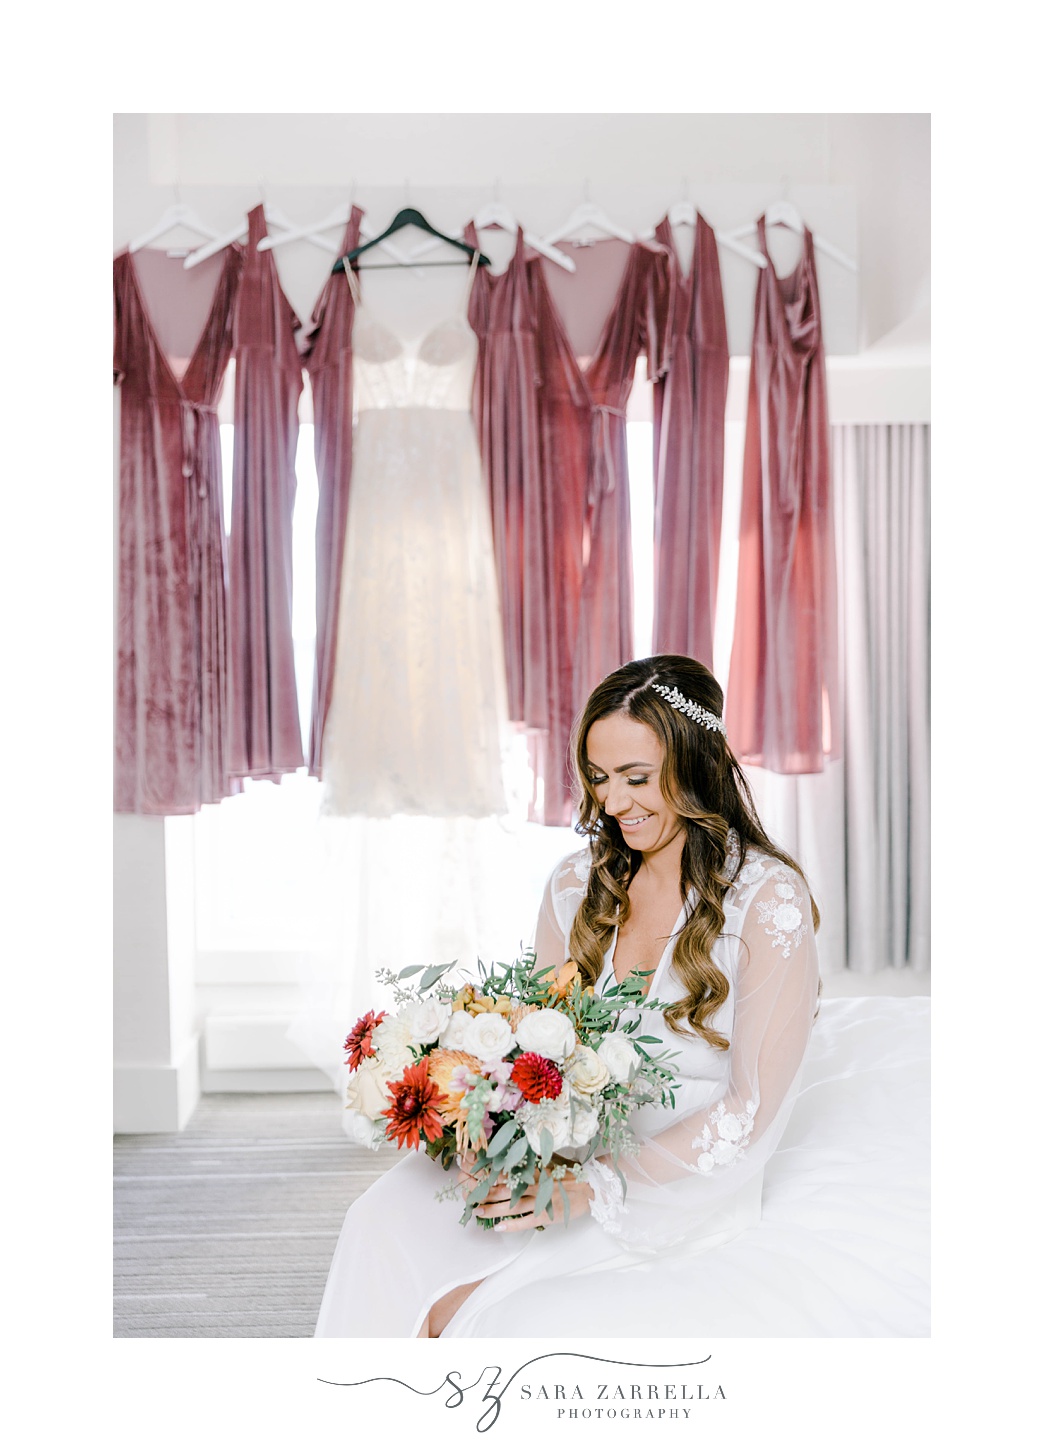 bride sits in front of hanging dress in window looking down at bouquet